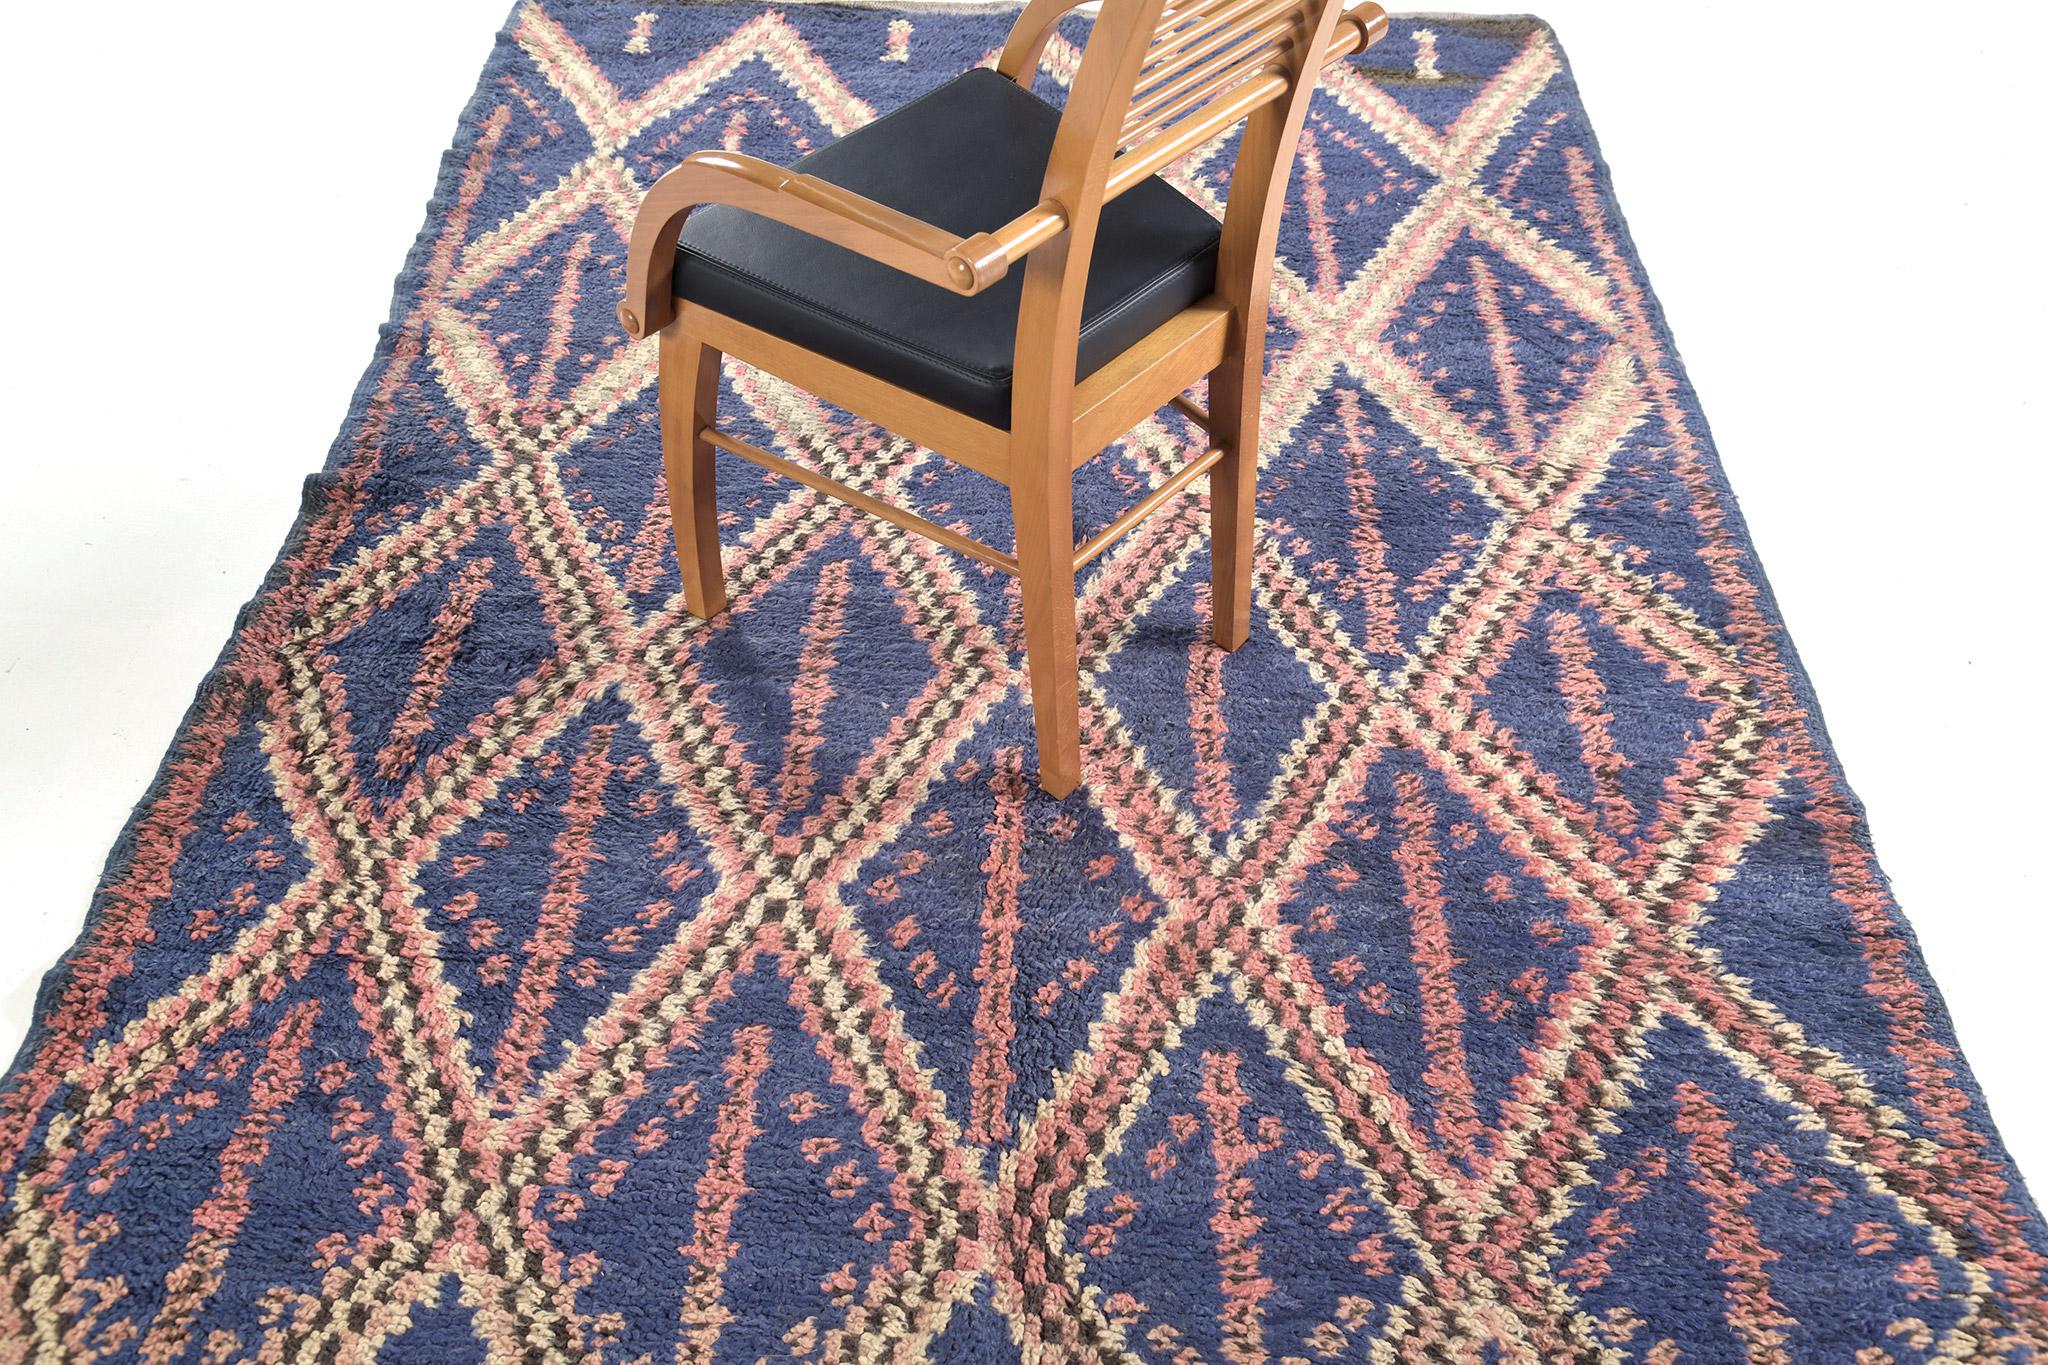 A breathtaking Vintage Moroccan Ourain Tribe rug. This magnificent rug features slate blue, hints of salmon and cream that create a gorgeous and exquisite piece that will enhance a wide variety of interiors. The panel design patterns of lozenge